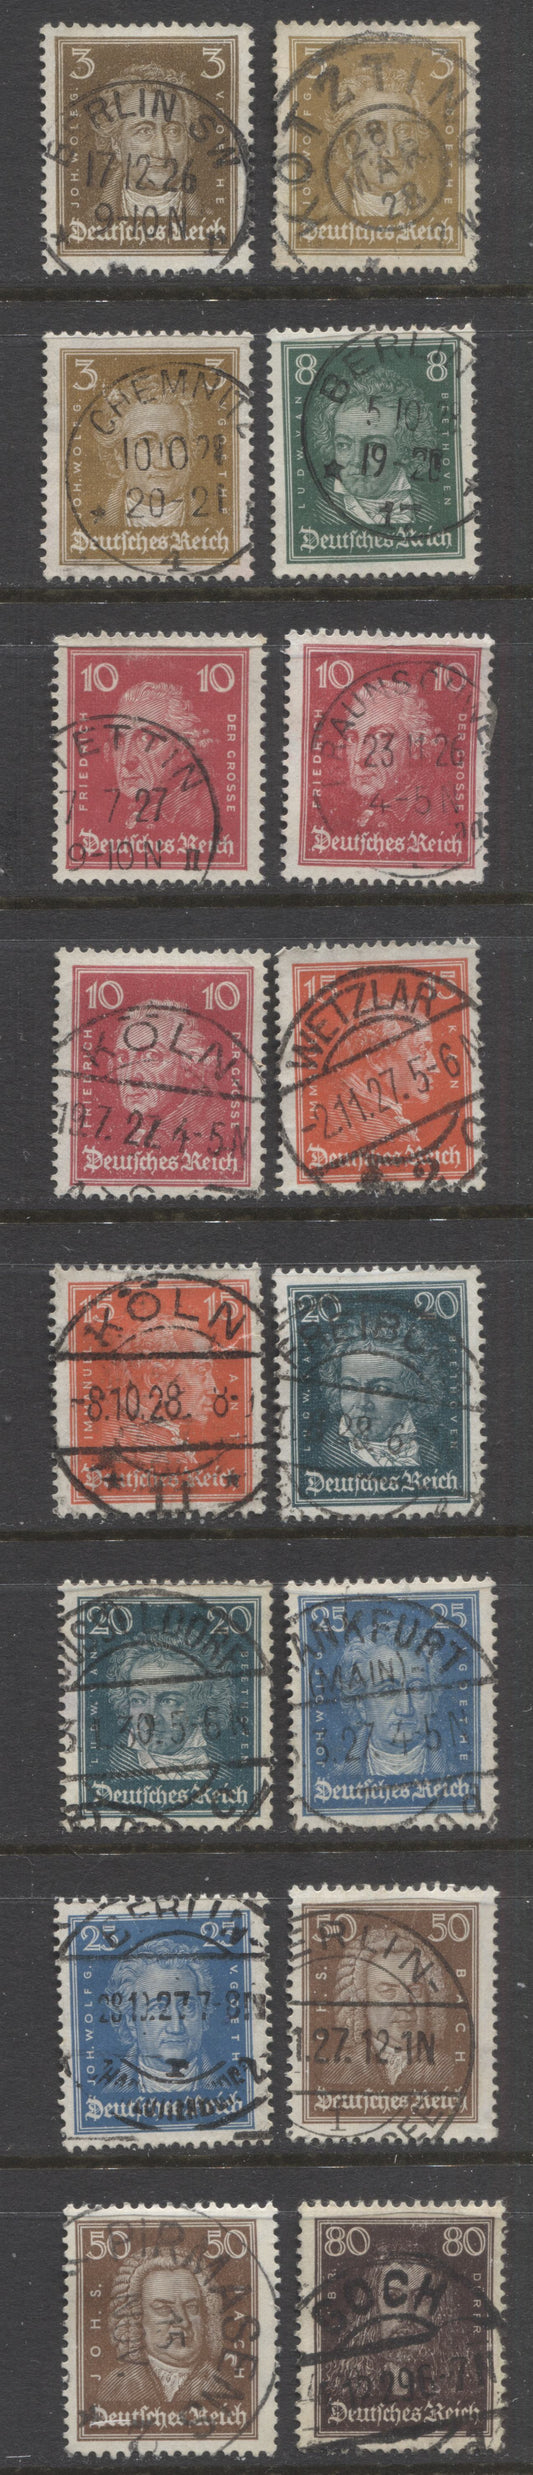 Lot 443 Germany SC#351/362 1926-1927 Famous German Men, All With SON Town Cancels, 16 VF Used Singles, Click on Listing to See ALL Pictures, 2022 Scott Classic Cat. $27.7